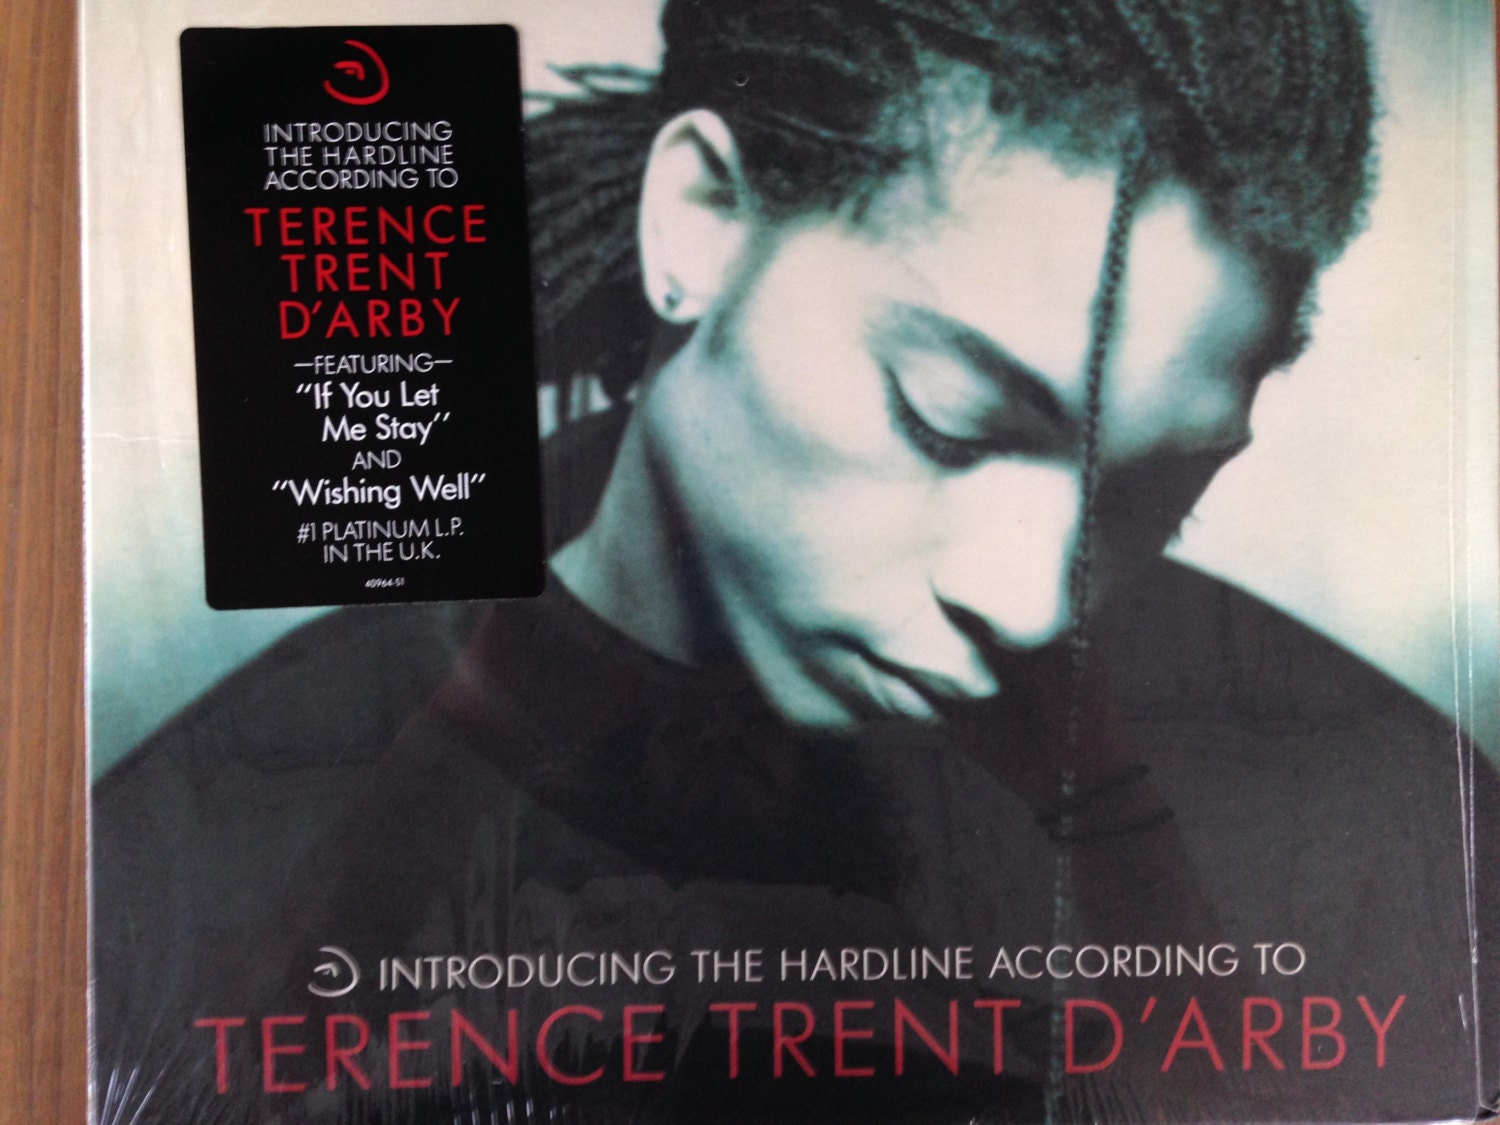 Terence Trent Darby Introducing The Hardline According To